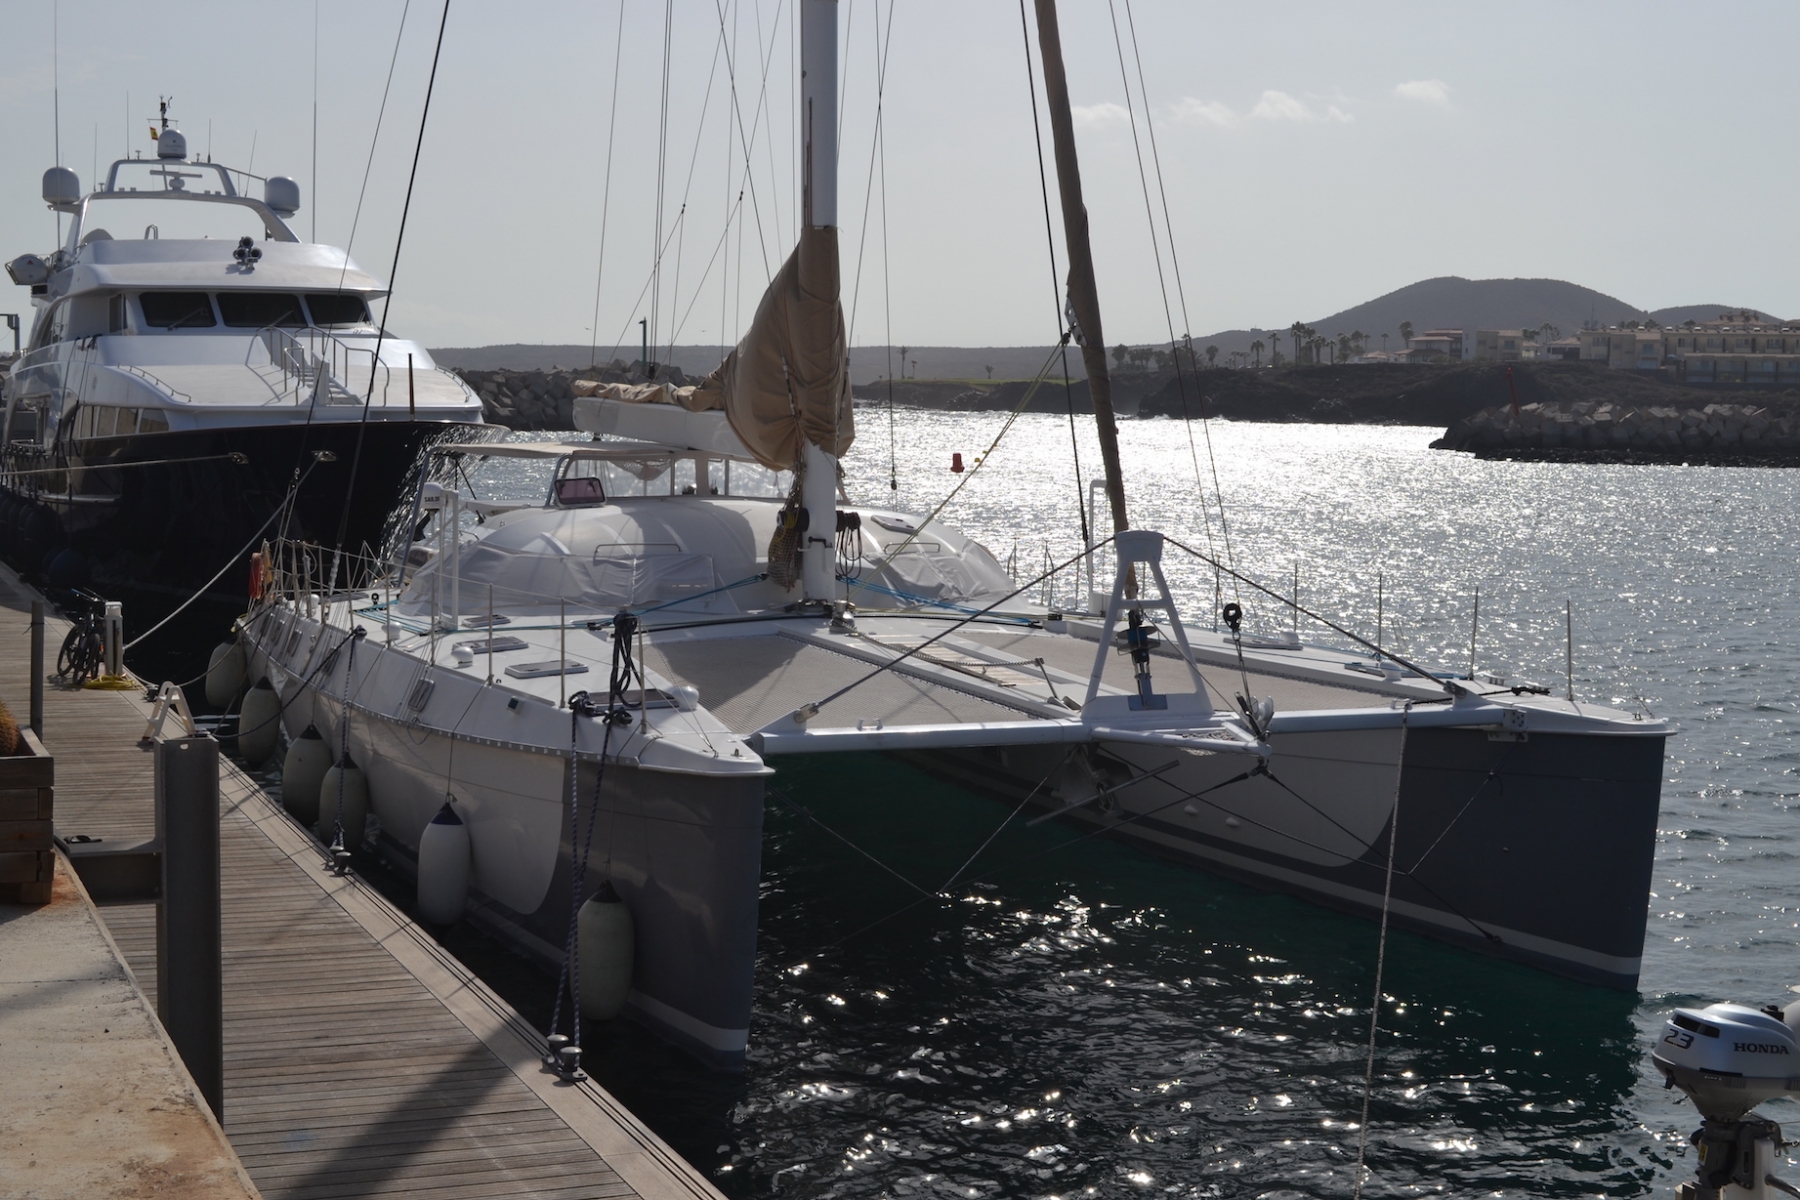 Outremer 63, managed by Yachtskipper.de